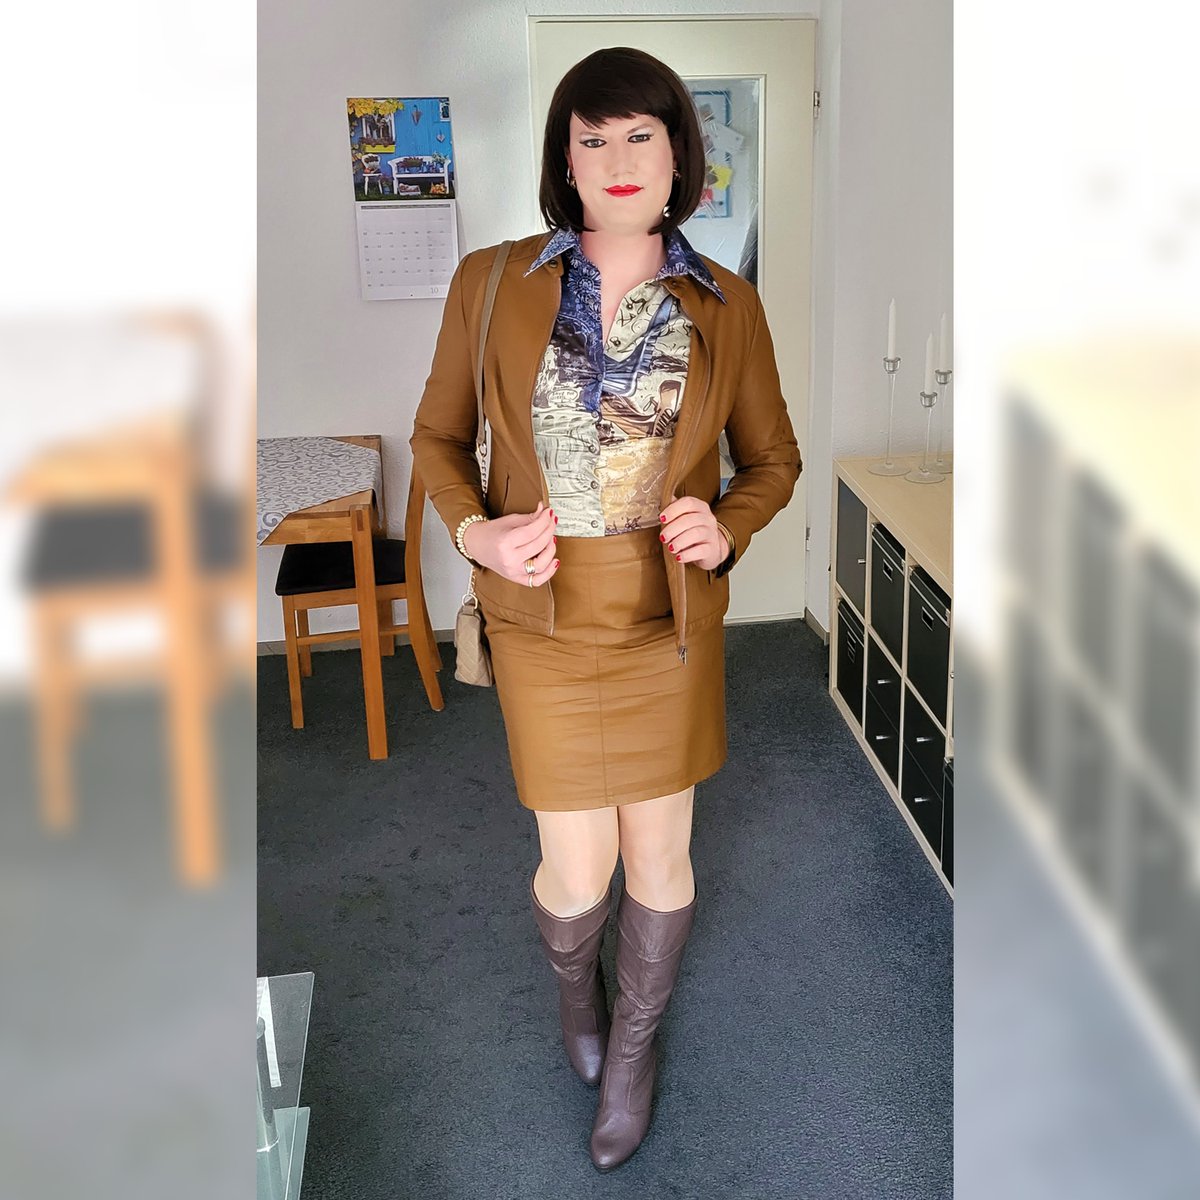 Fall fashion Part 5

This faux leather ensemble is one of my favorite fall outfits. It is casual but also elegant. It's an eye-catcher, but it doesn't scream for attention. And most importantly, I feel comfortable in it.
🍁🍂🍁🍂🍁

#leather #skirtsuit #satinblouse #boots